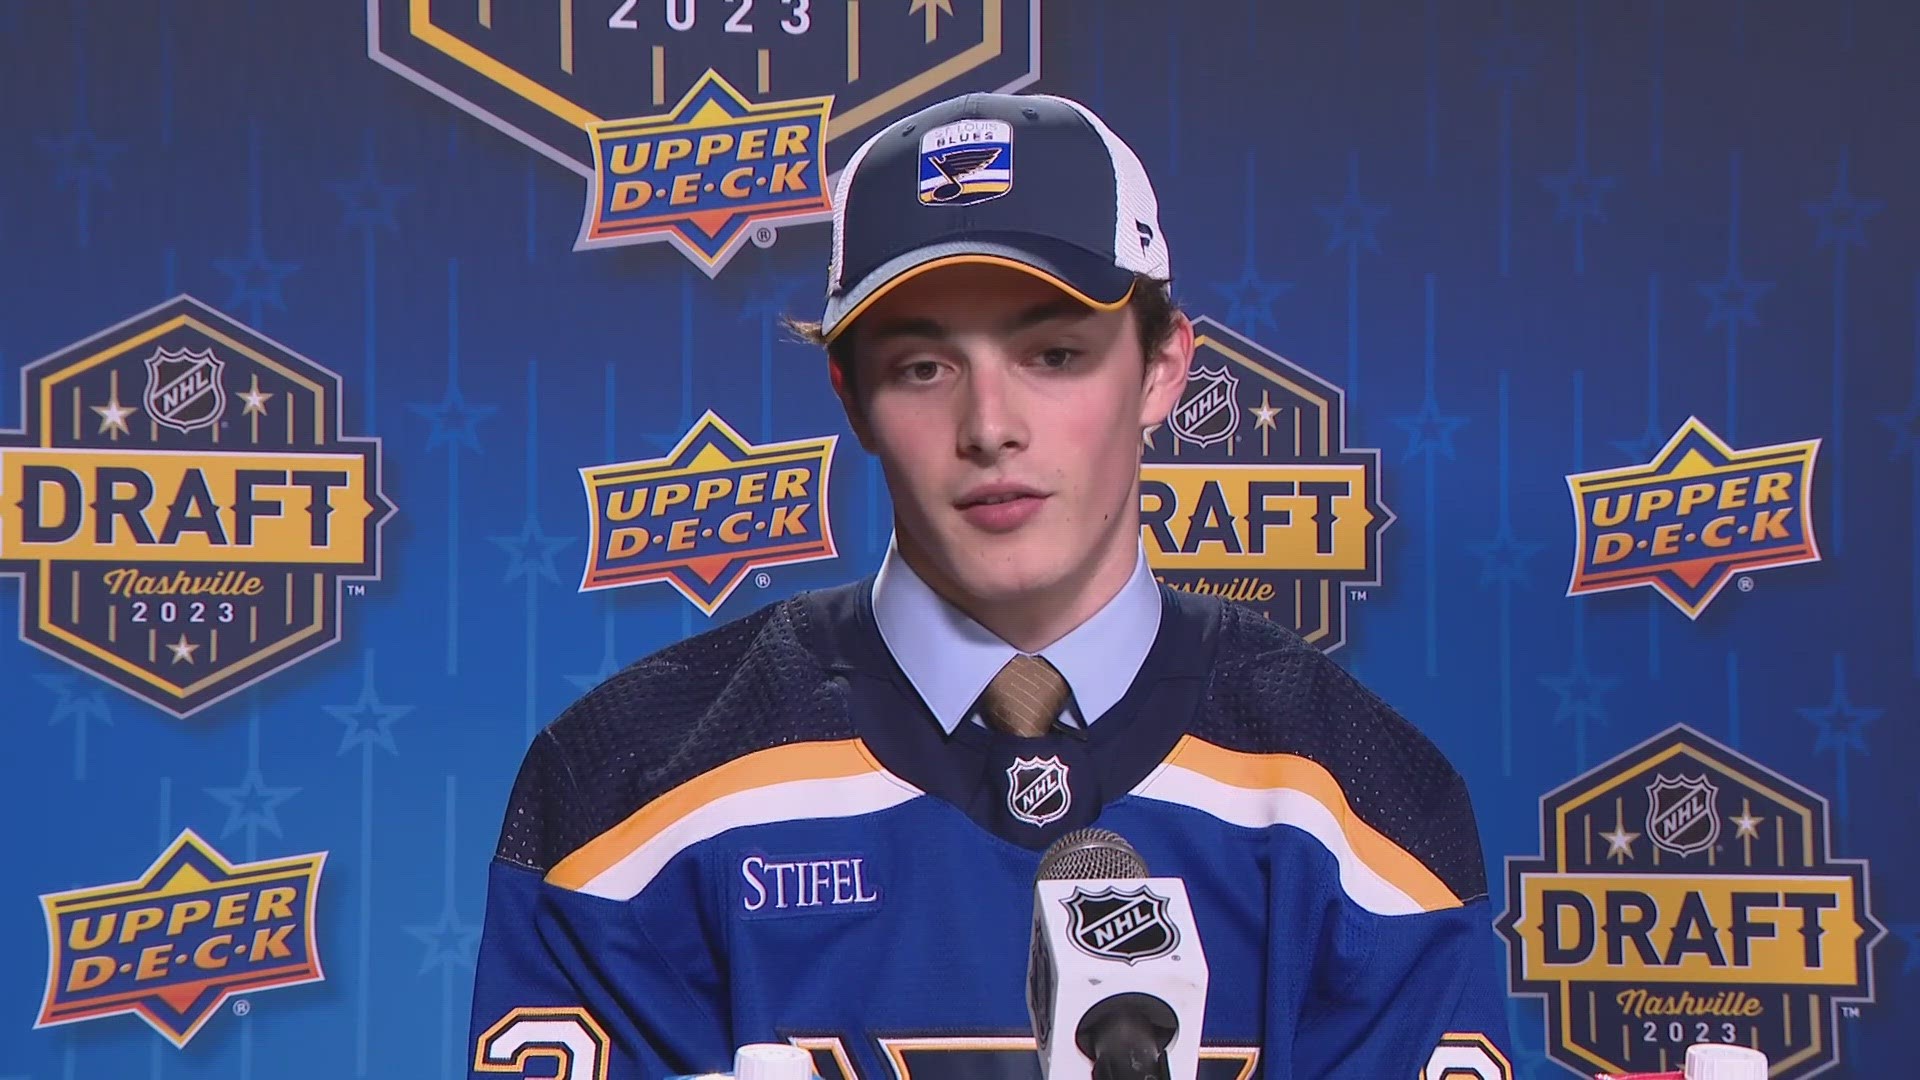 Here's who the St. Louis Blues selected in the 2023 NHL Draft. The 2023 NHL Draft kicked off Wednesday evening in Nashville, Tennessee.